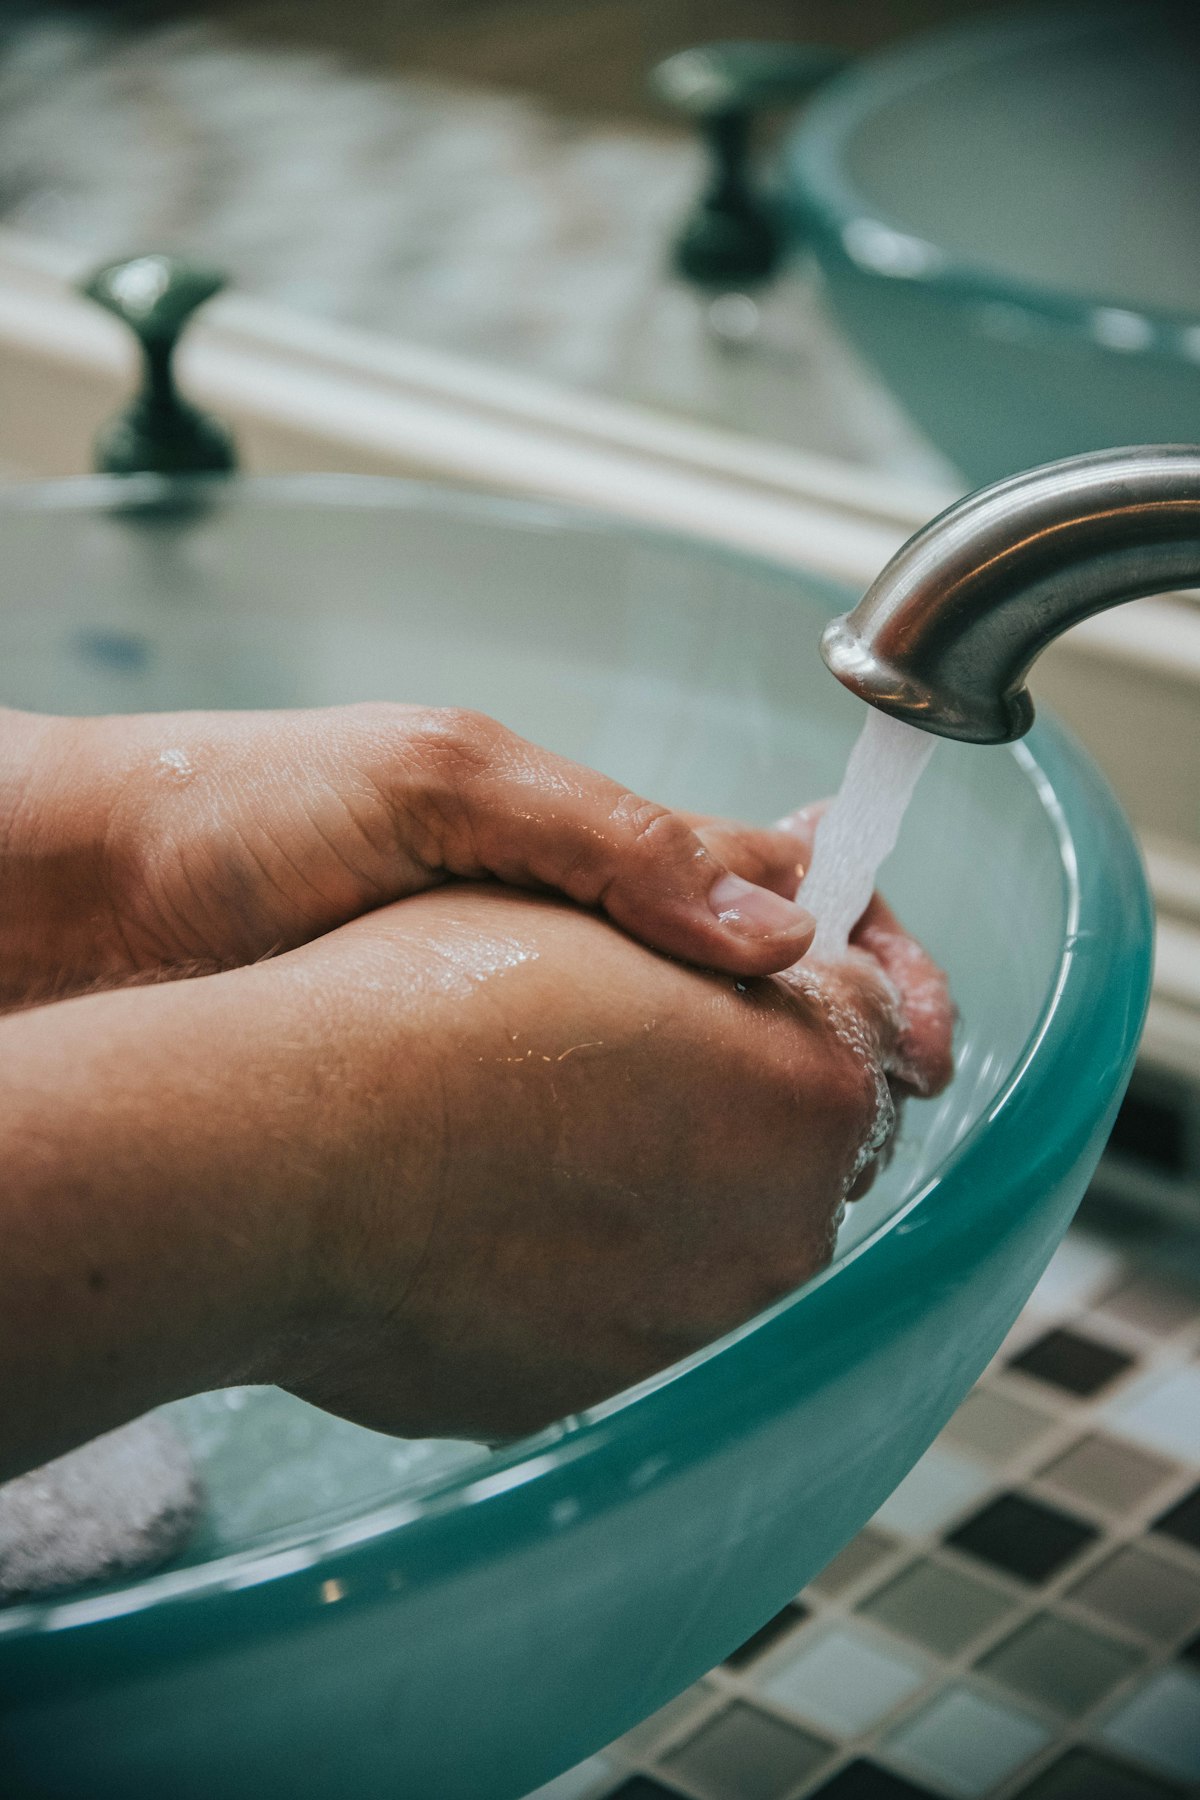 The Secret Weapon Against Viruses: The Soap in Your Kitchen Sink